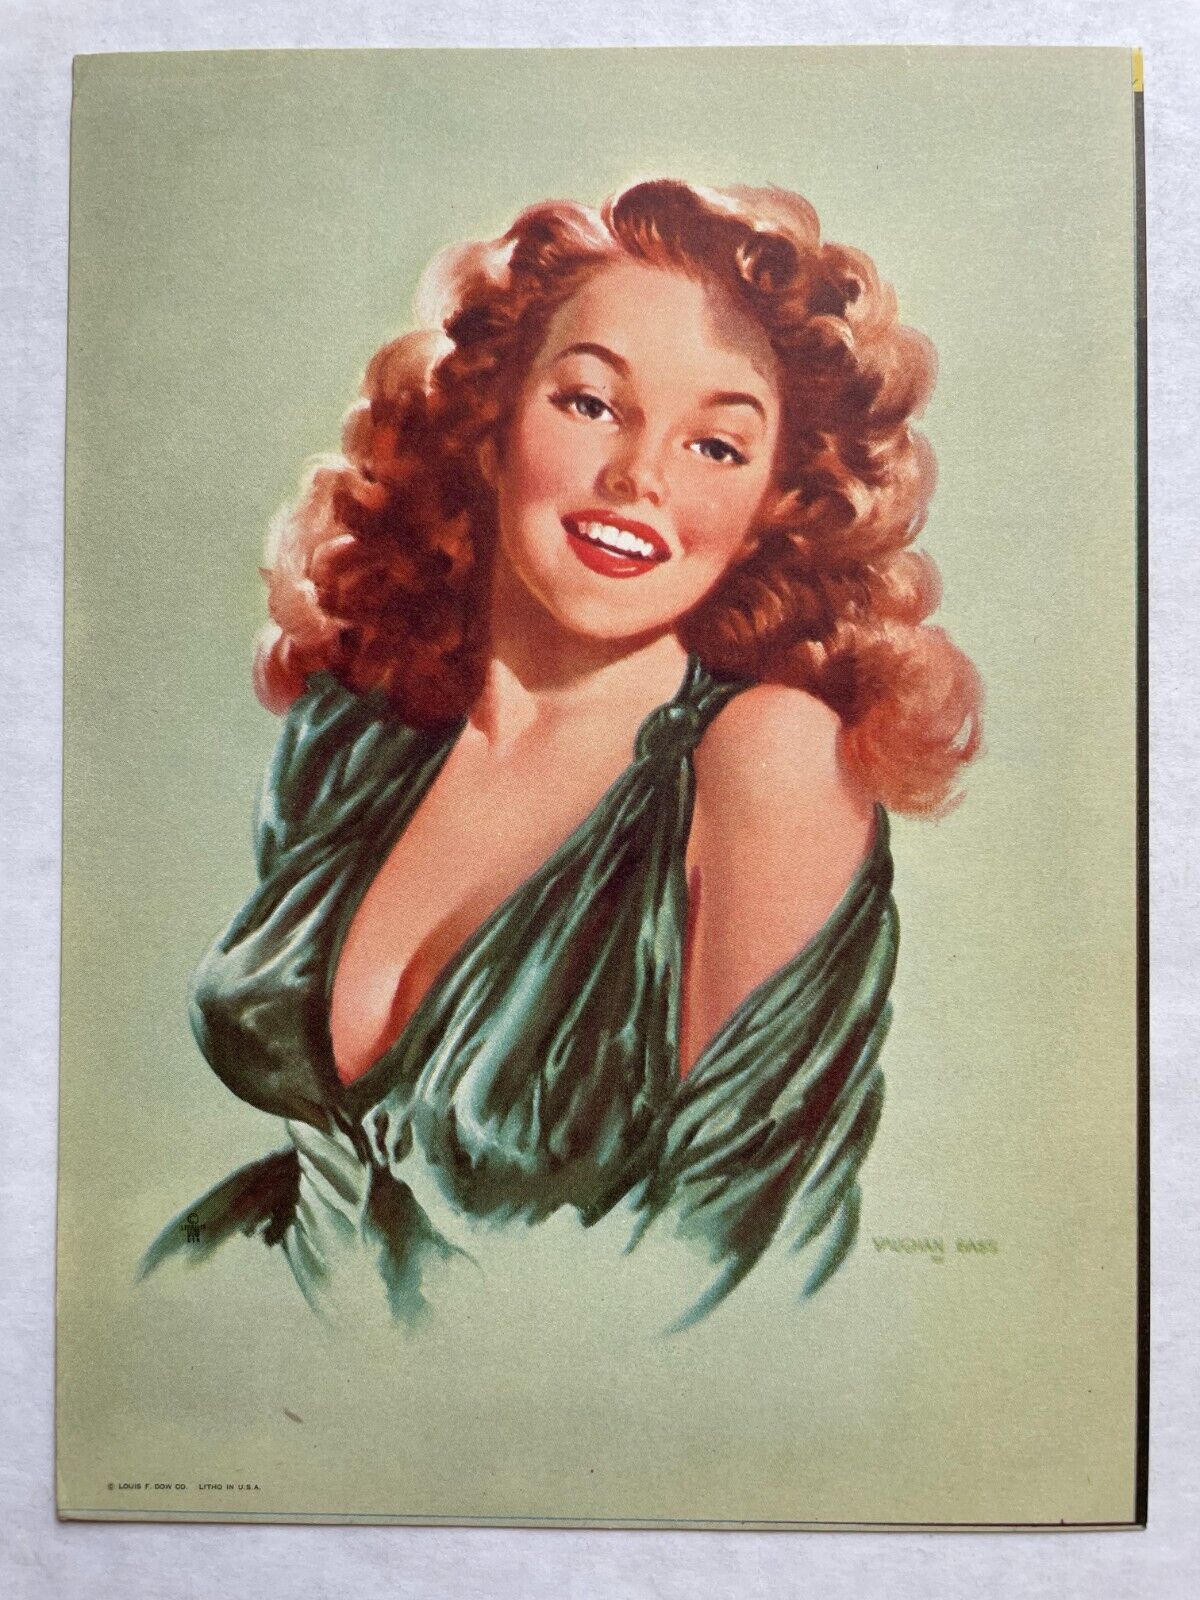 Vintage 1950-60's SMALL Pinup Girl Picture Busty Red Head by Vaughan Bass